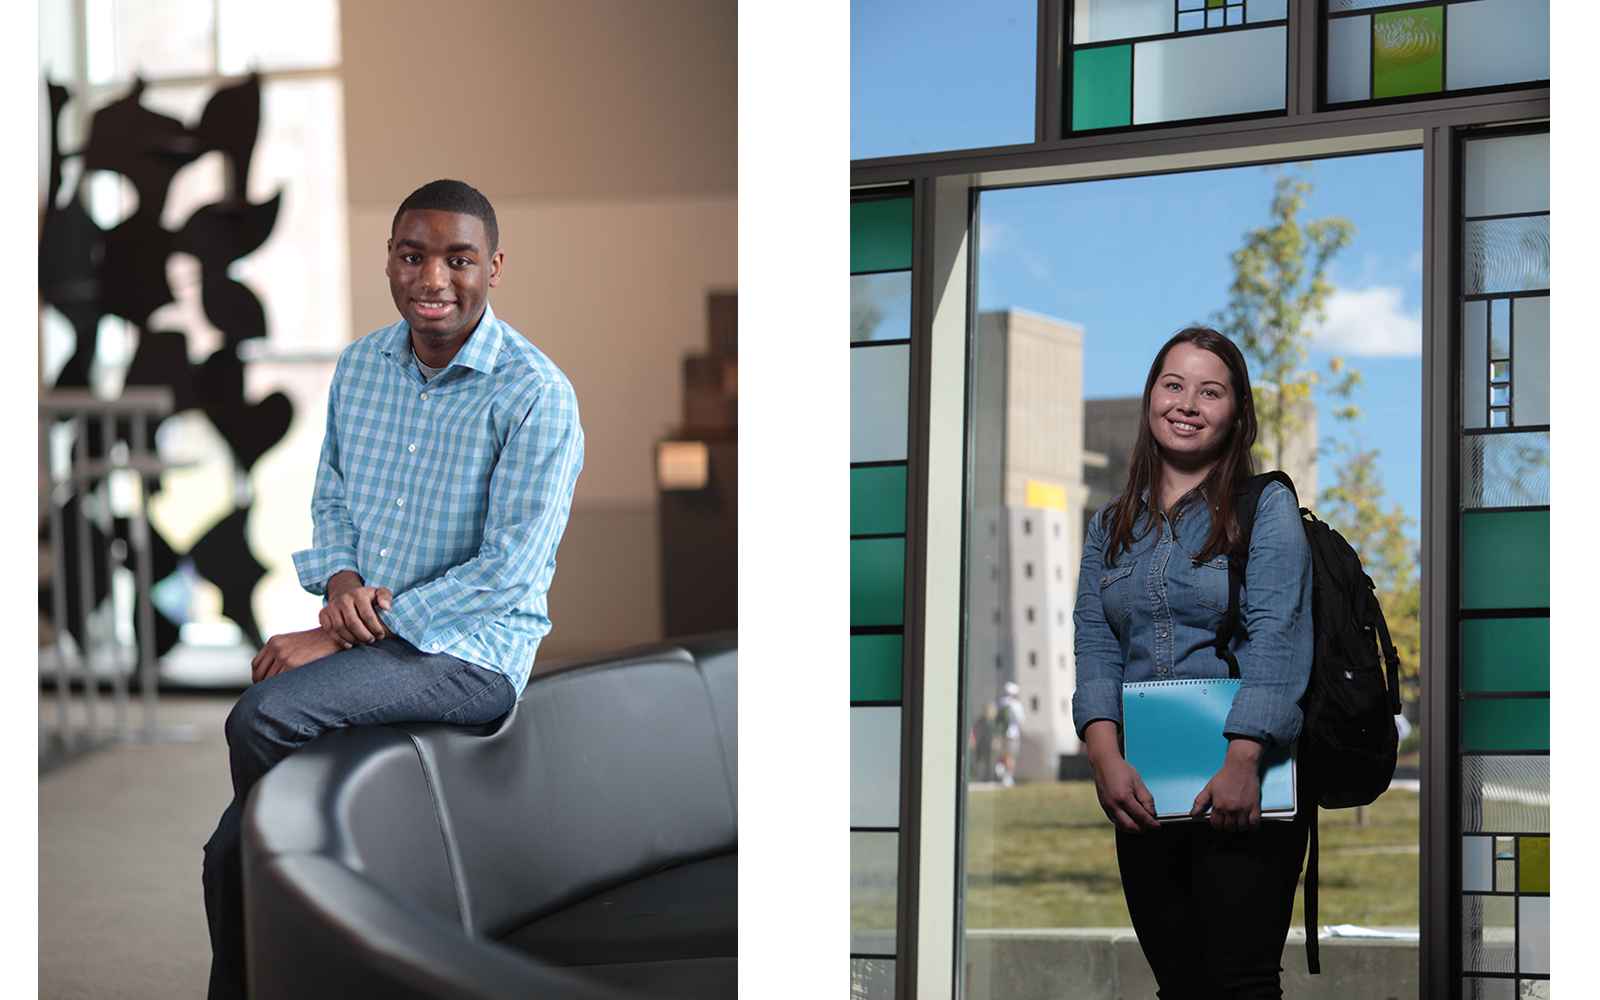 Alumni Quian Callender '16 and Kamila Magiera '16 say scholarships gave them the chance to learn, grow and succeed. (Nathan Oldham/UConn School of Business)